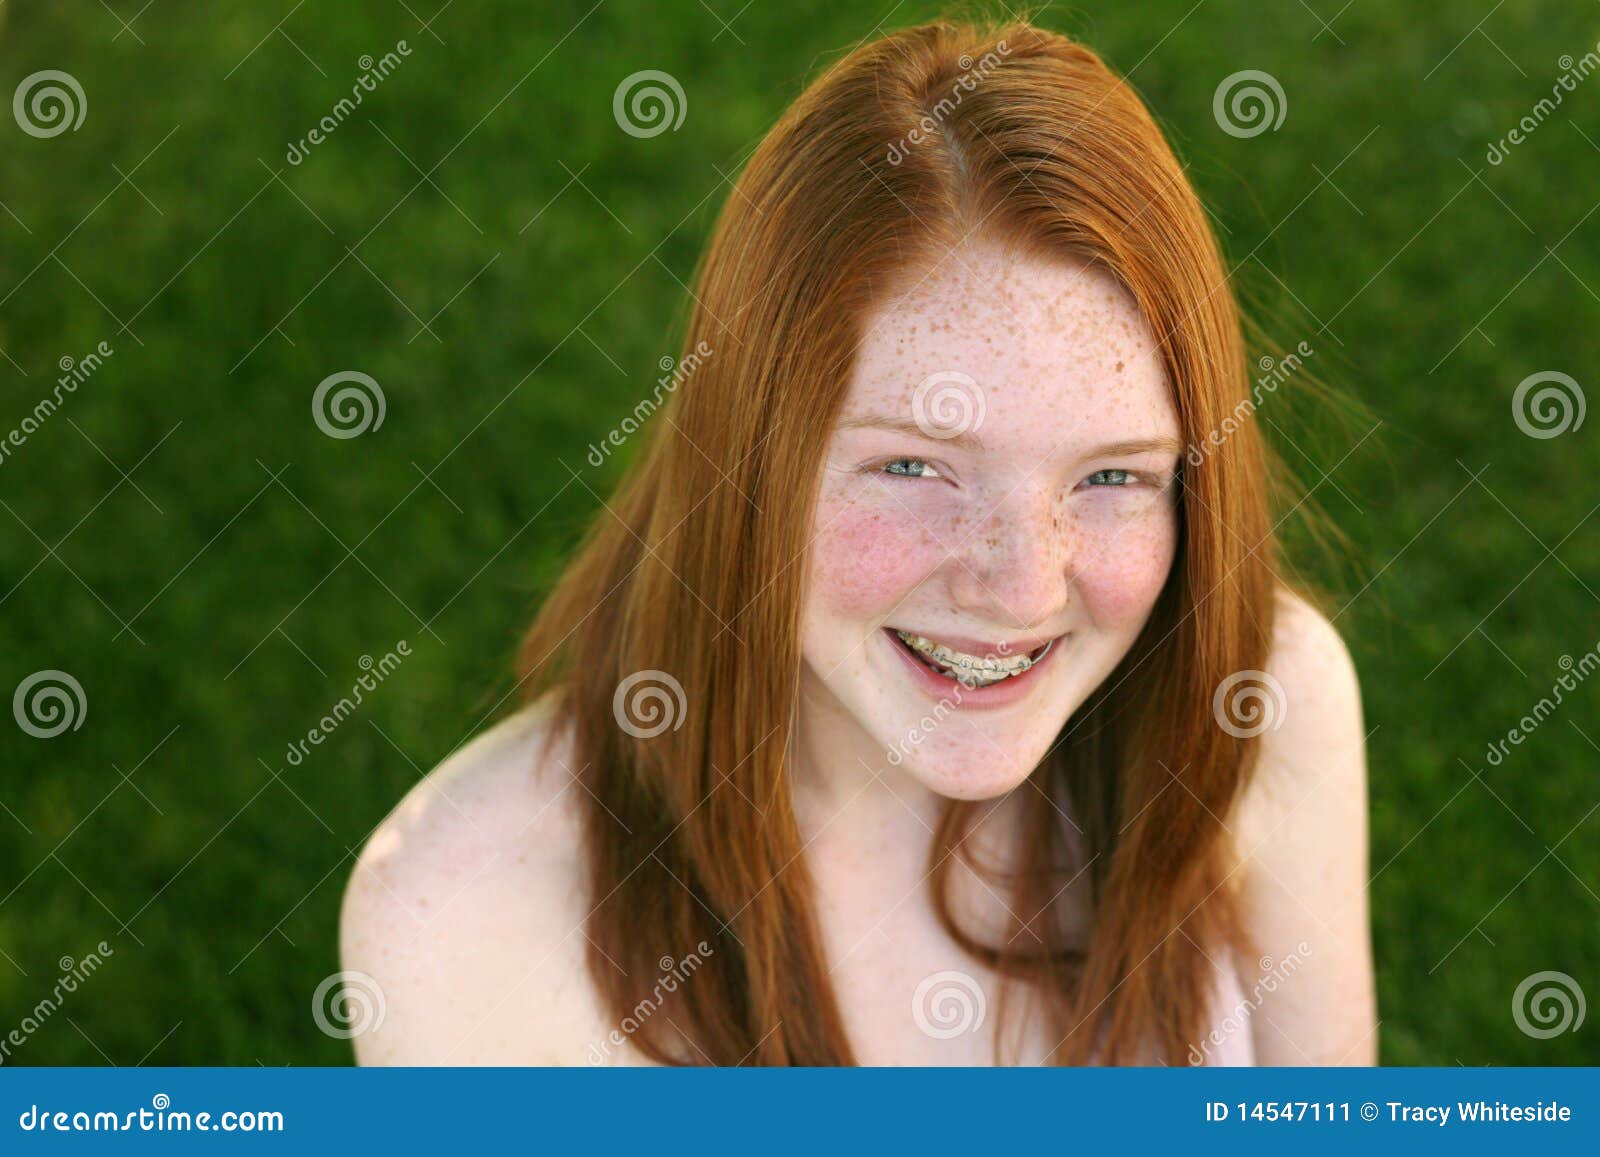 redhead girls with braces pic from sex video